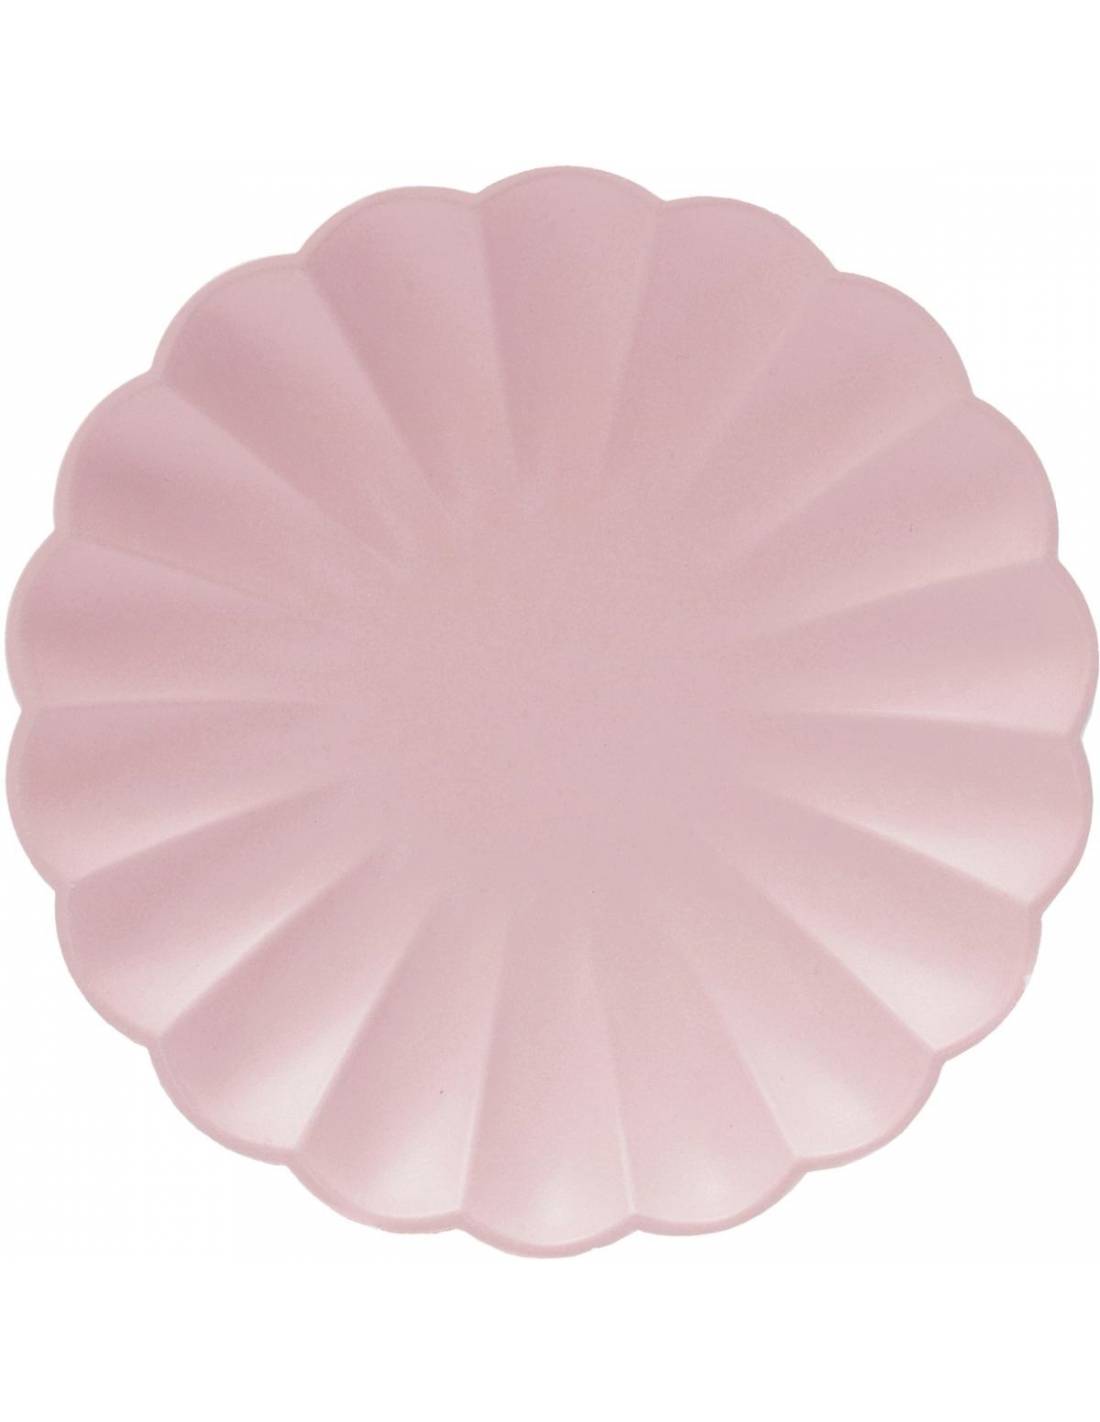 Basic eco compostable pink scalloped plate / 8 units.